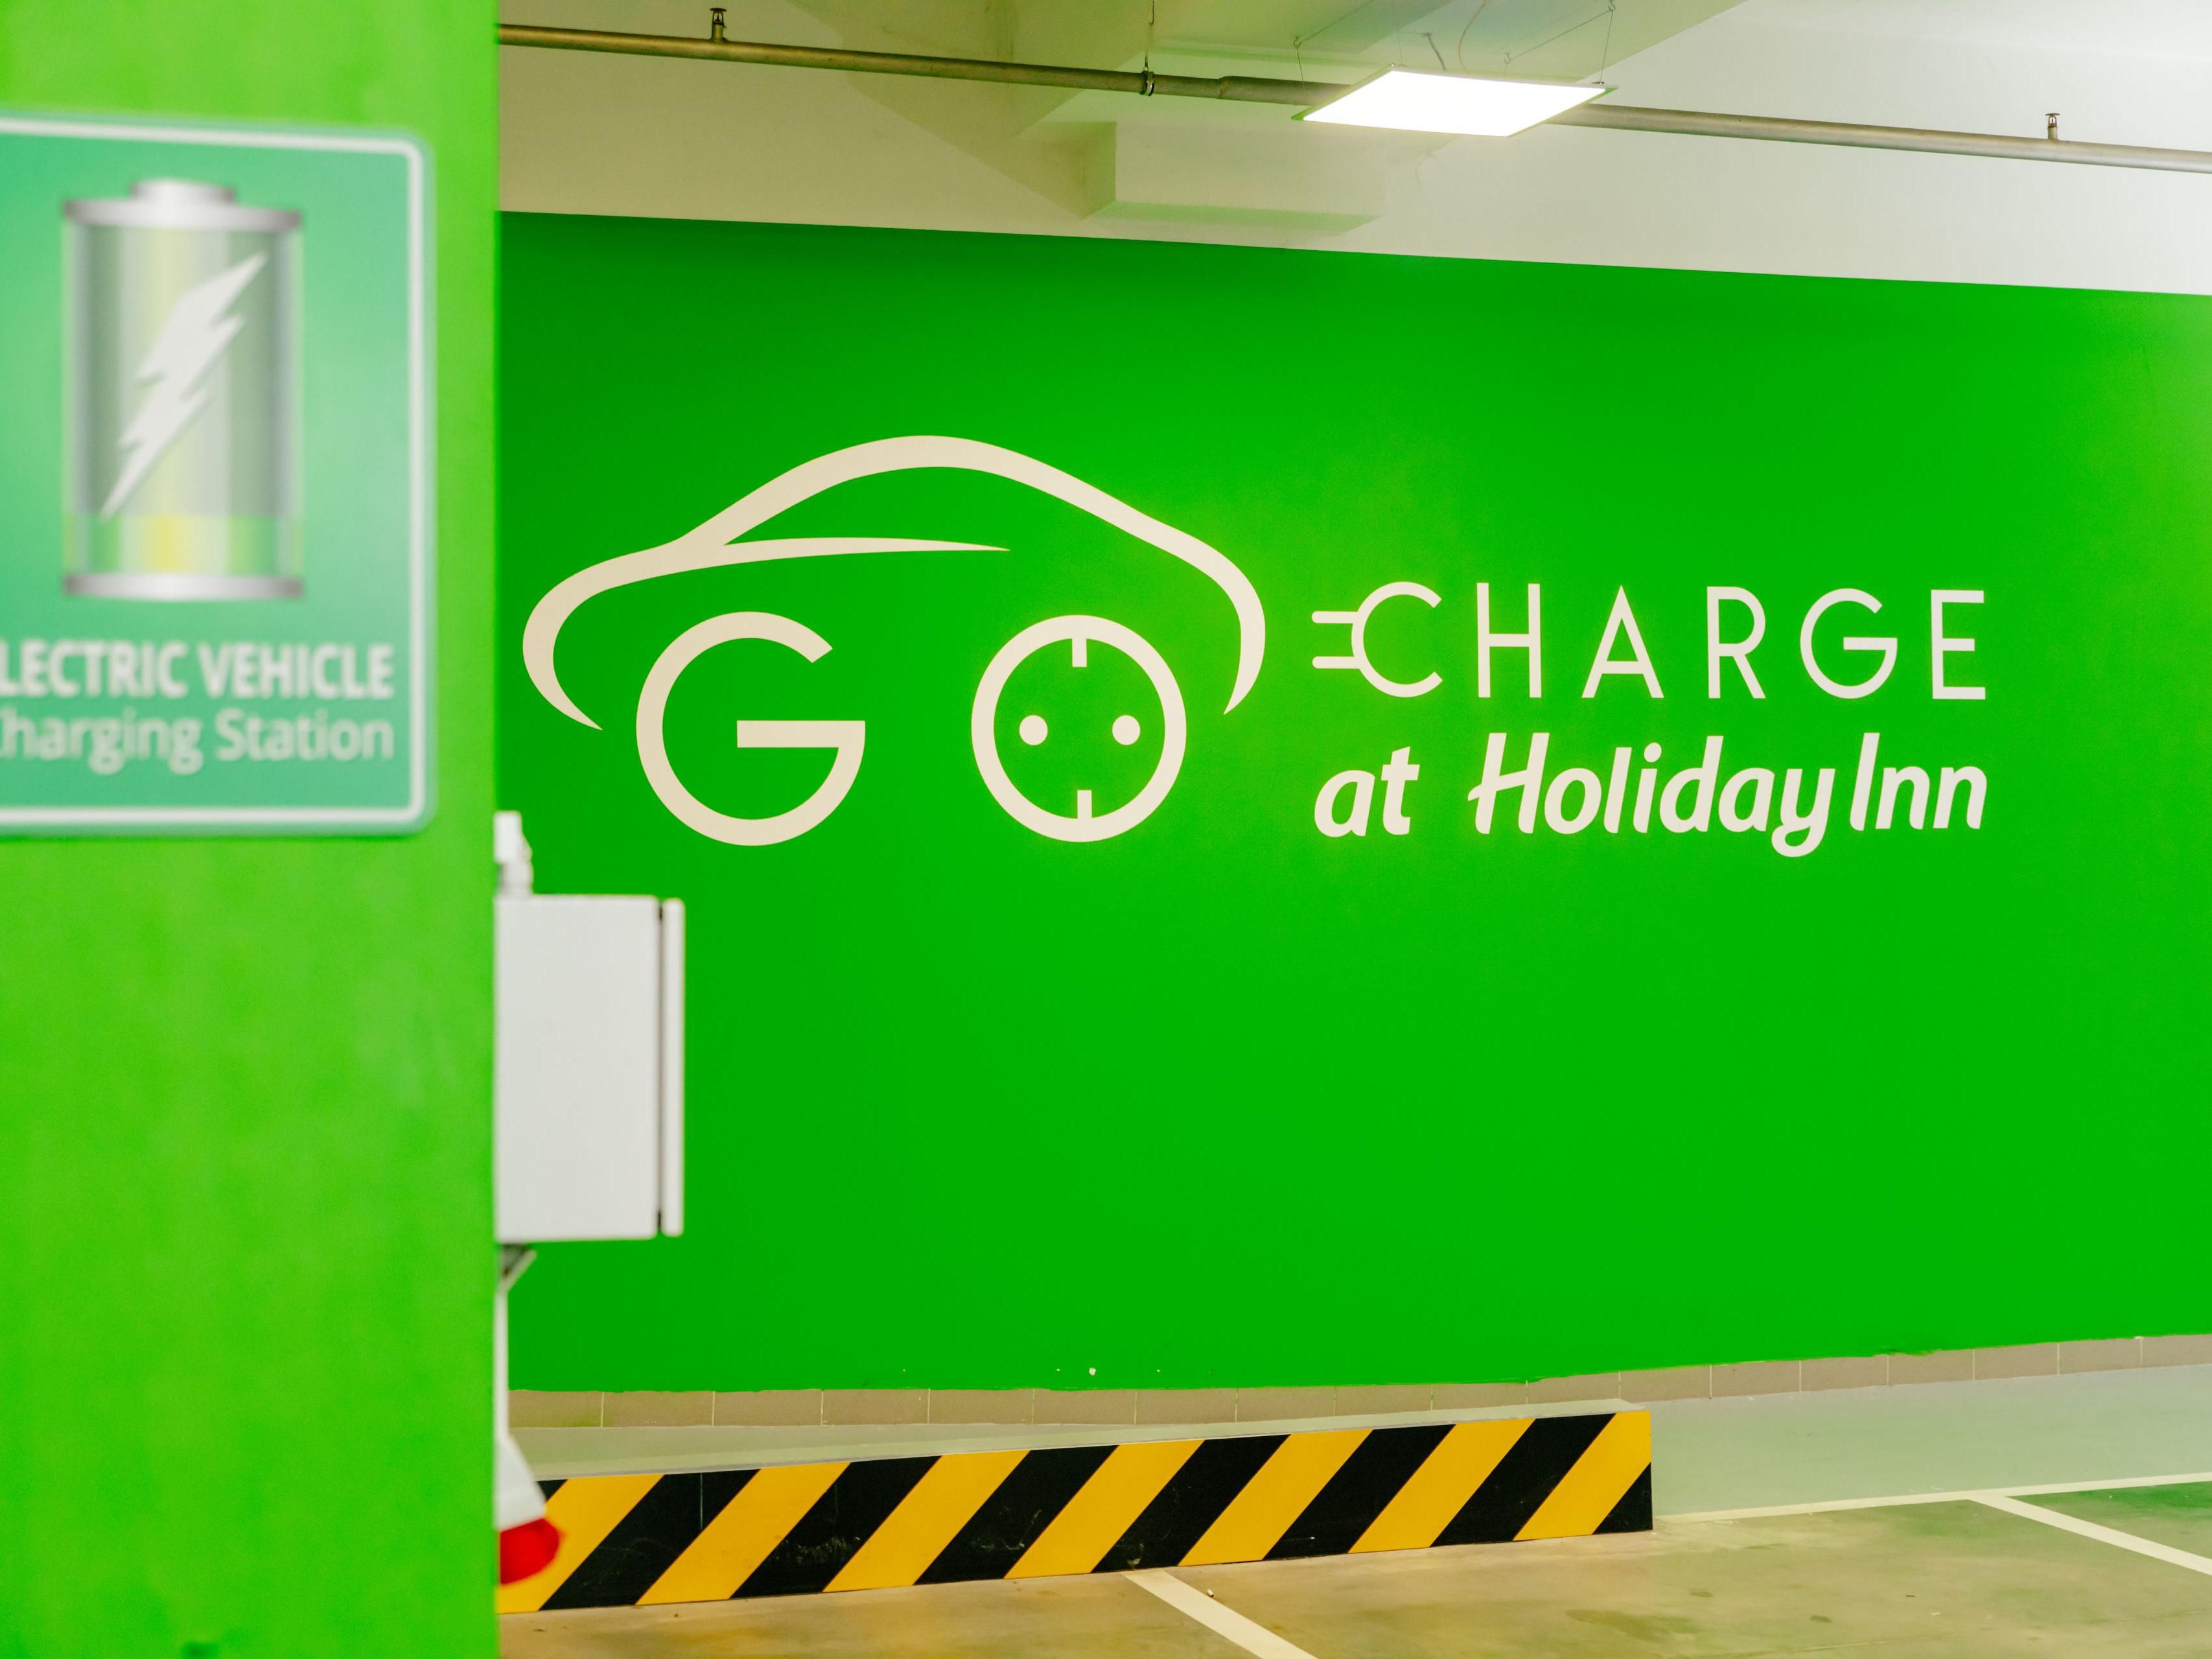 Charge your electric vehicle at Holiday Inn Belgrade! 
We think about the future and care about the nature. 